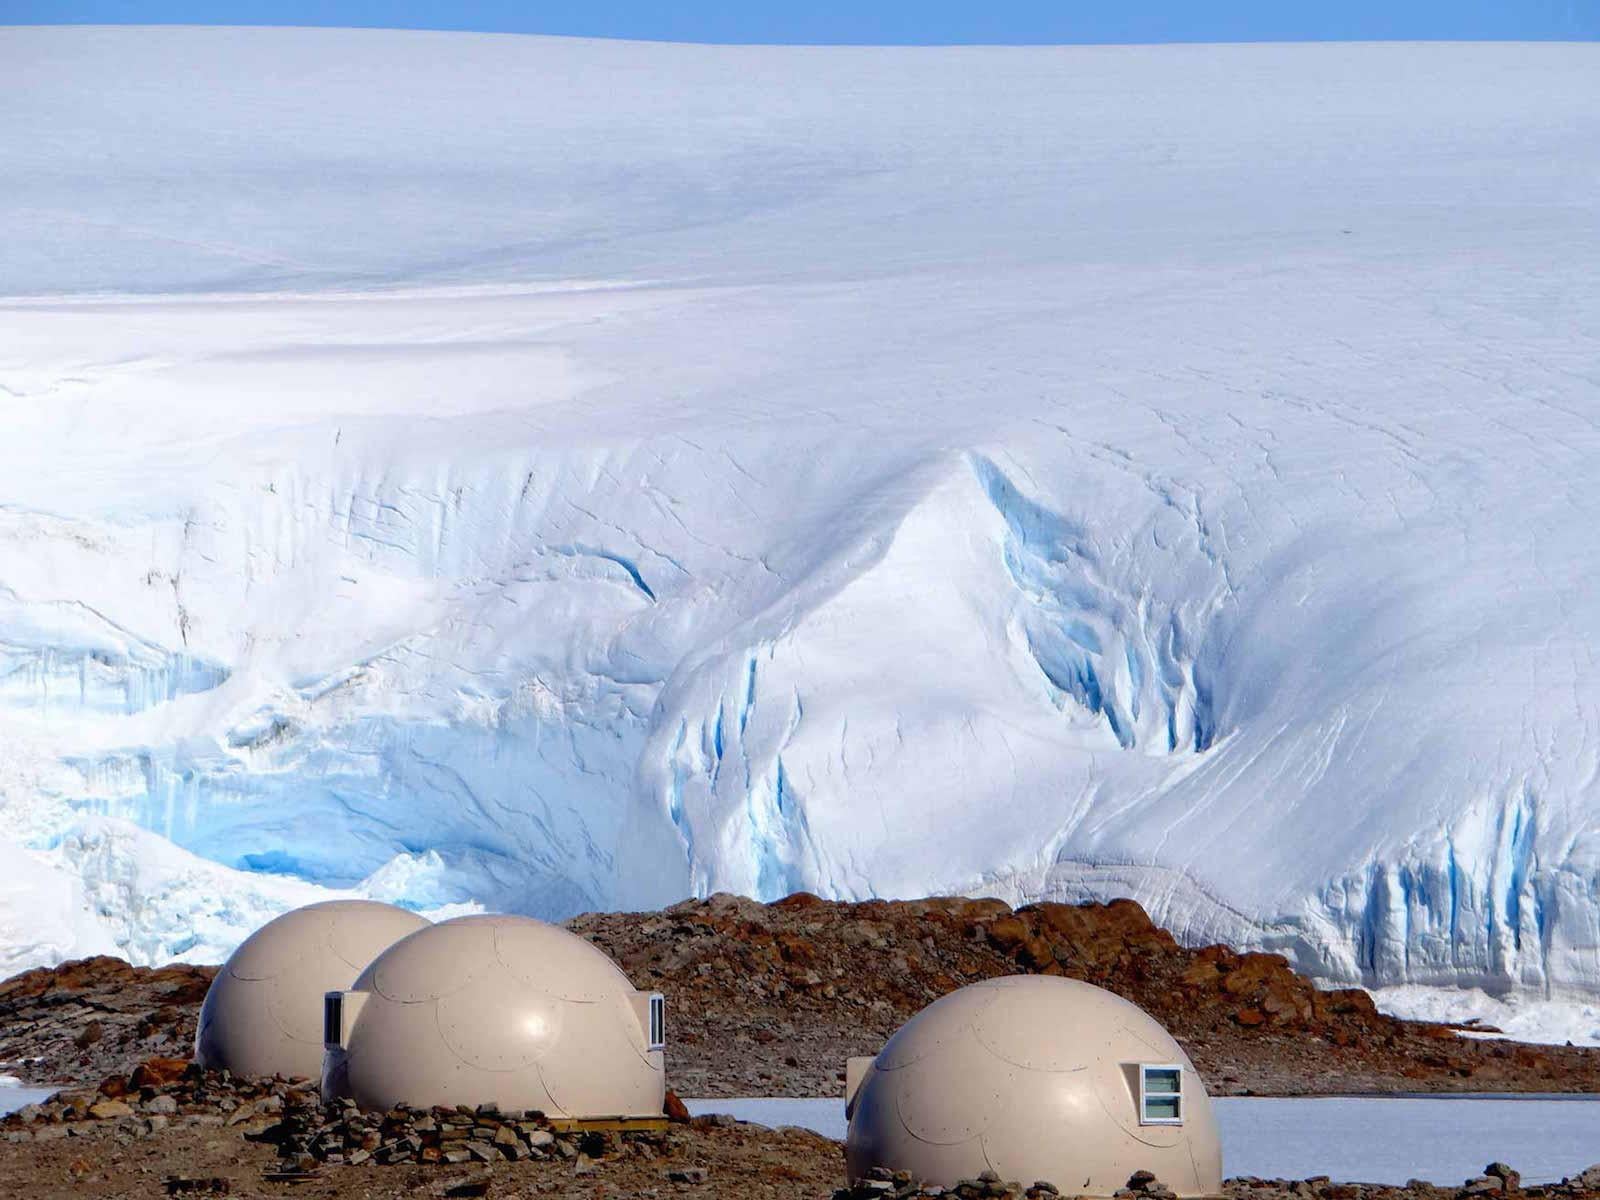 Extreme glamping in Antarctica